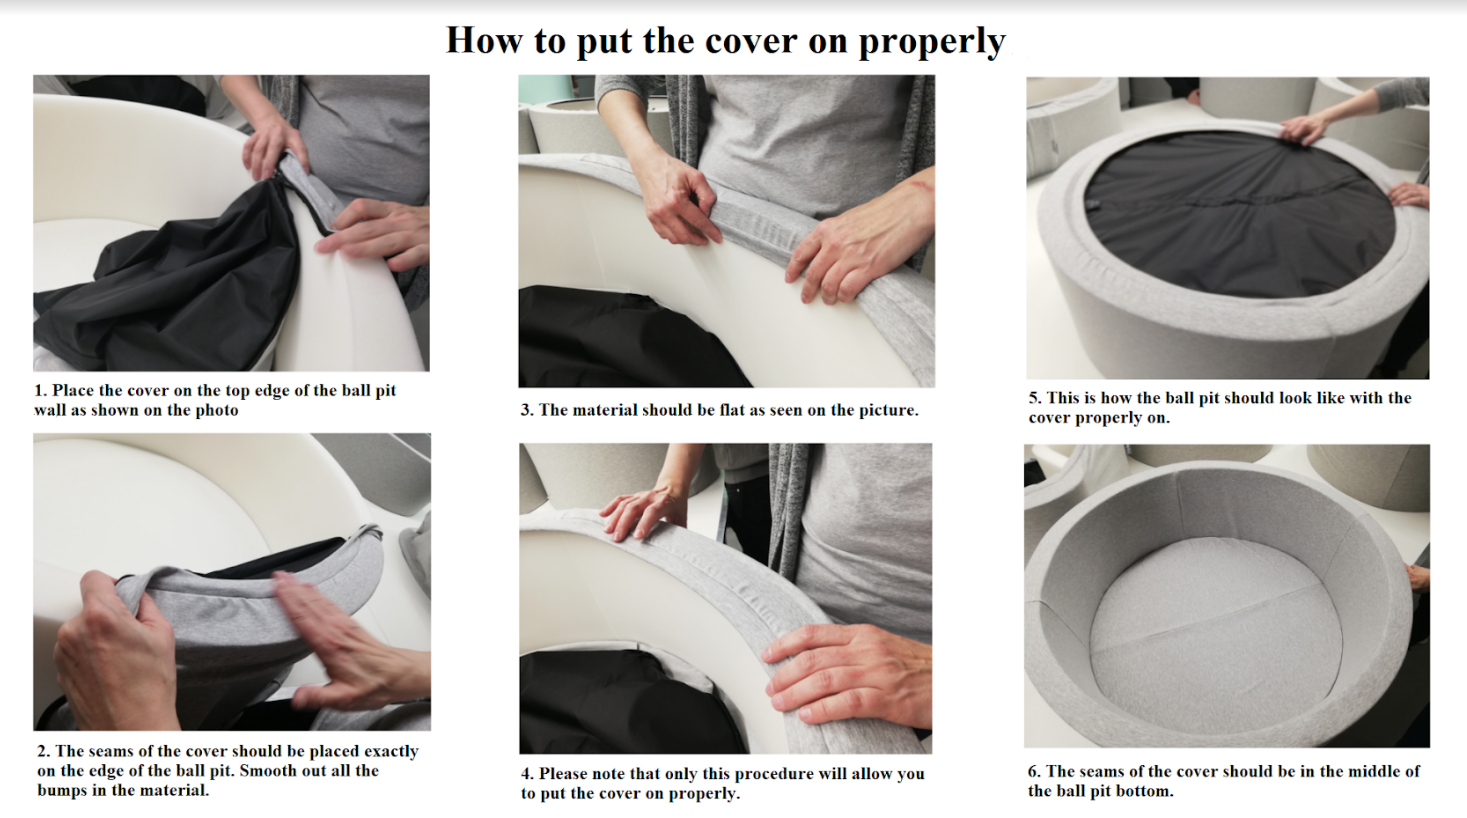 how to put cover on properly